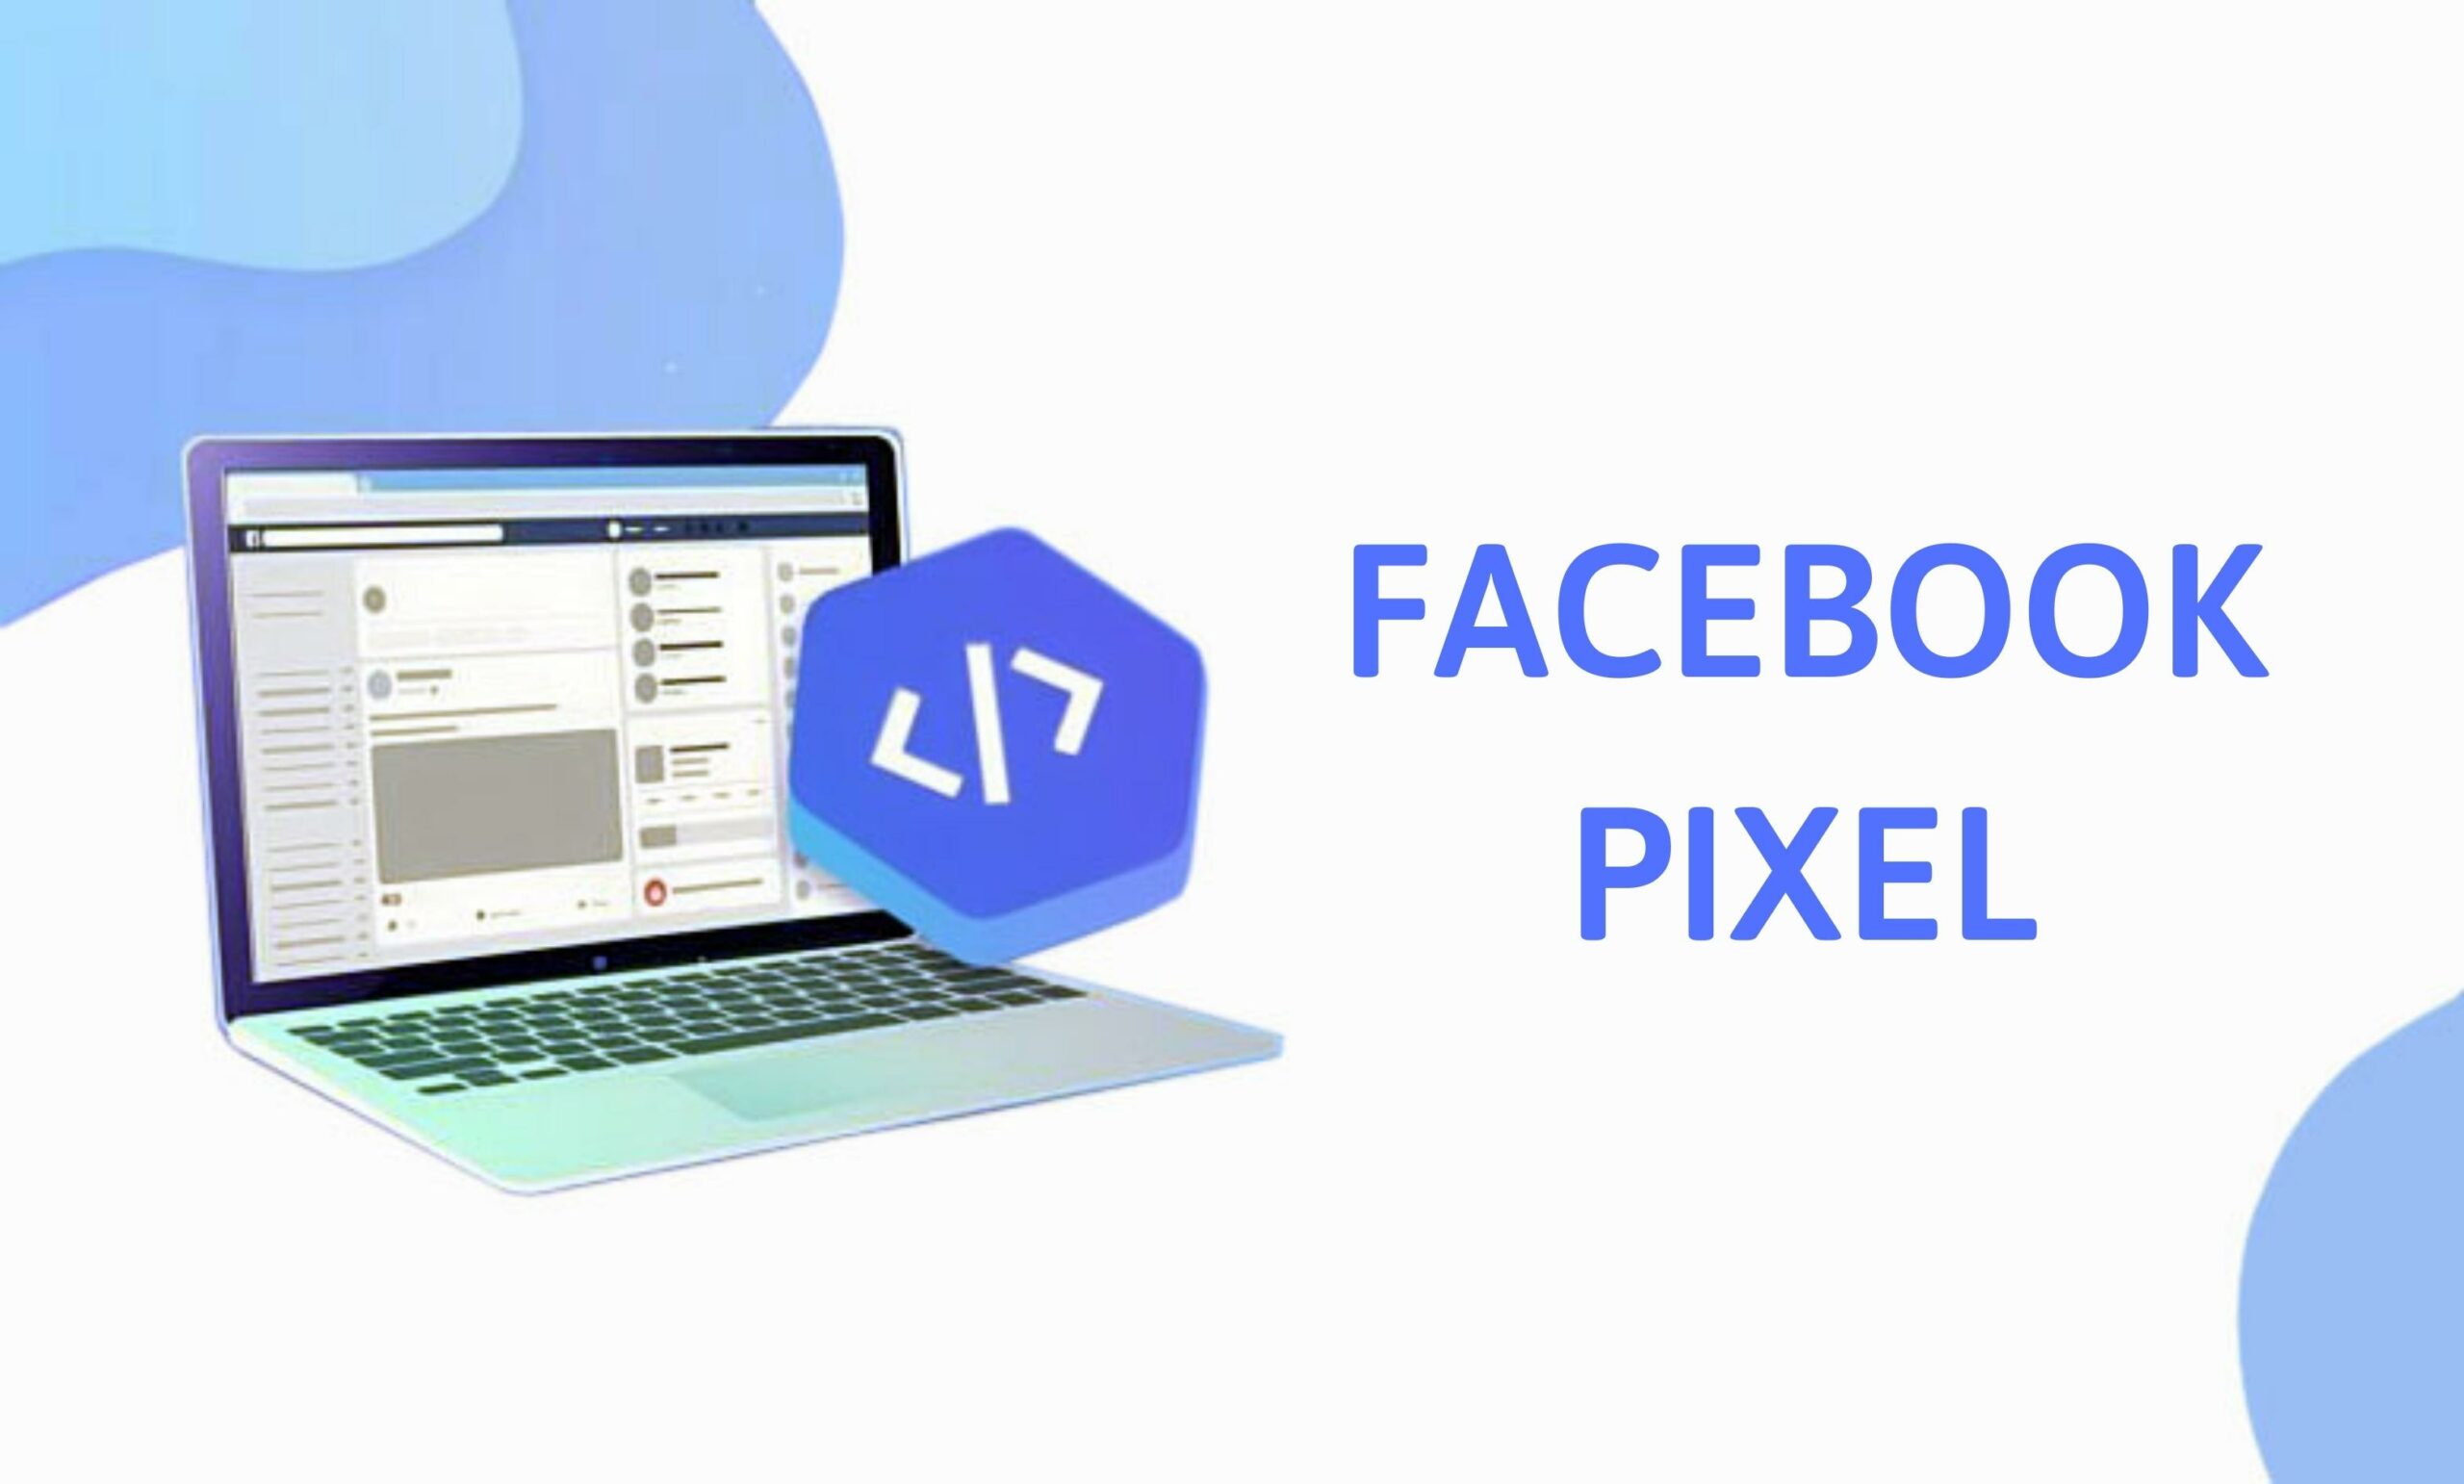 Facebook Pixel Helper will help you check if your Facebook pixel is working properly scaled